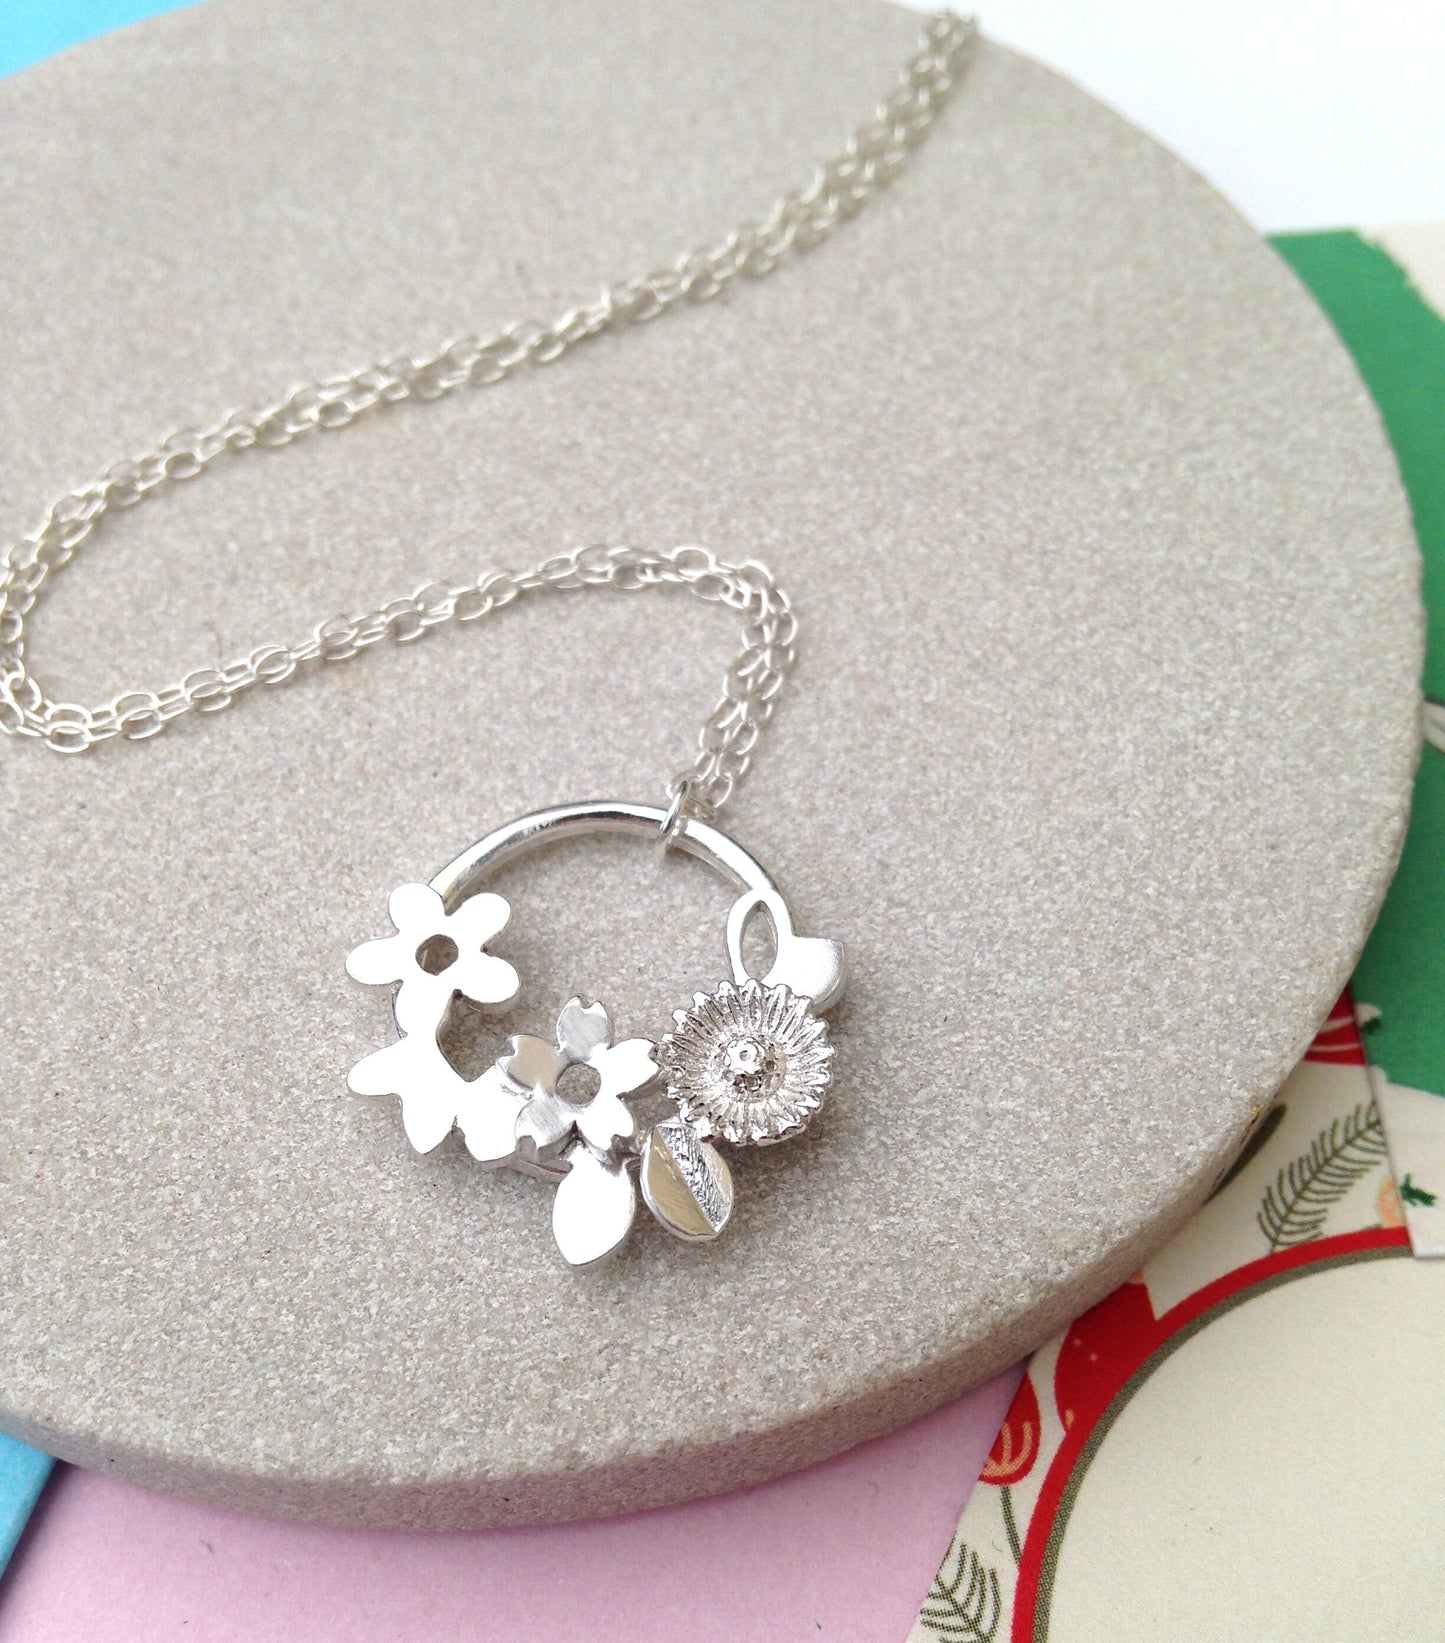 Sterling Silver Flower Garland Necklace, Floral Wreath Pendant, Floral Eternity Charm, Nature Botanical Jewellery, Birthday Gift For Friend